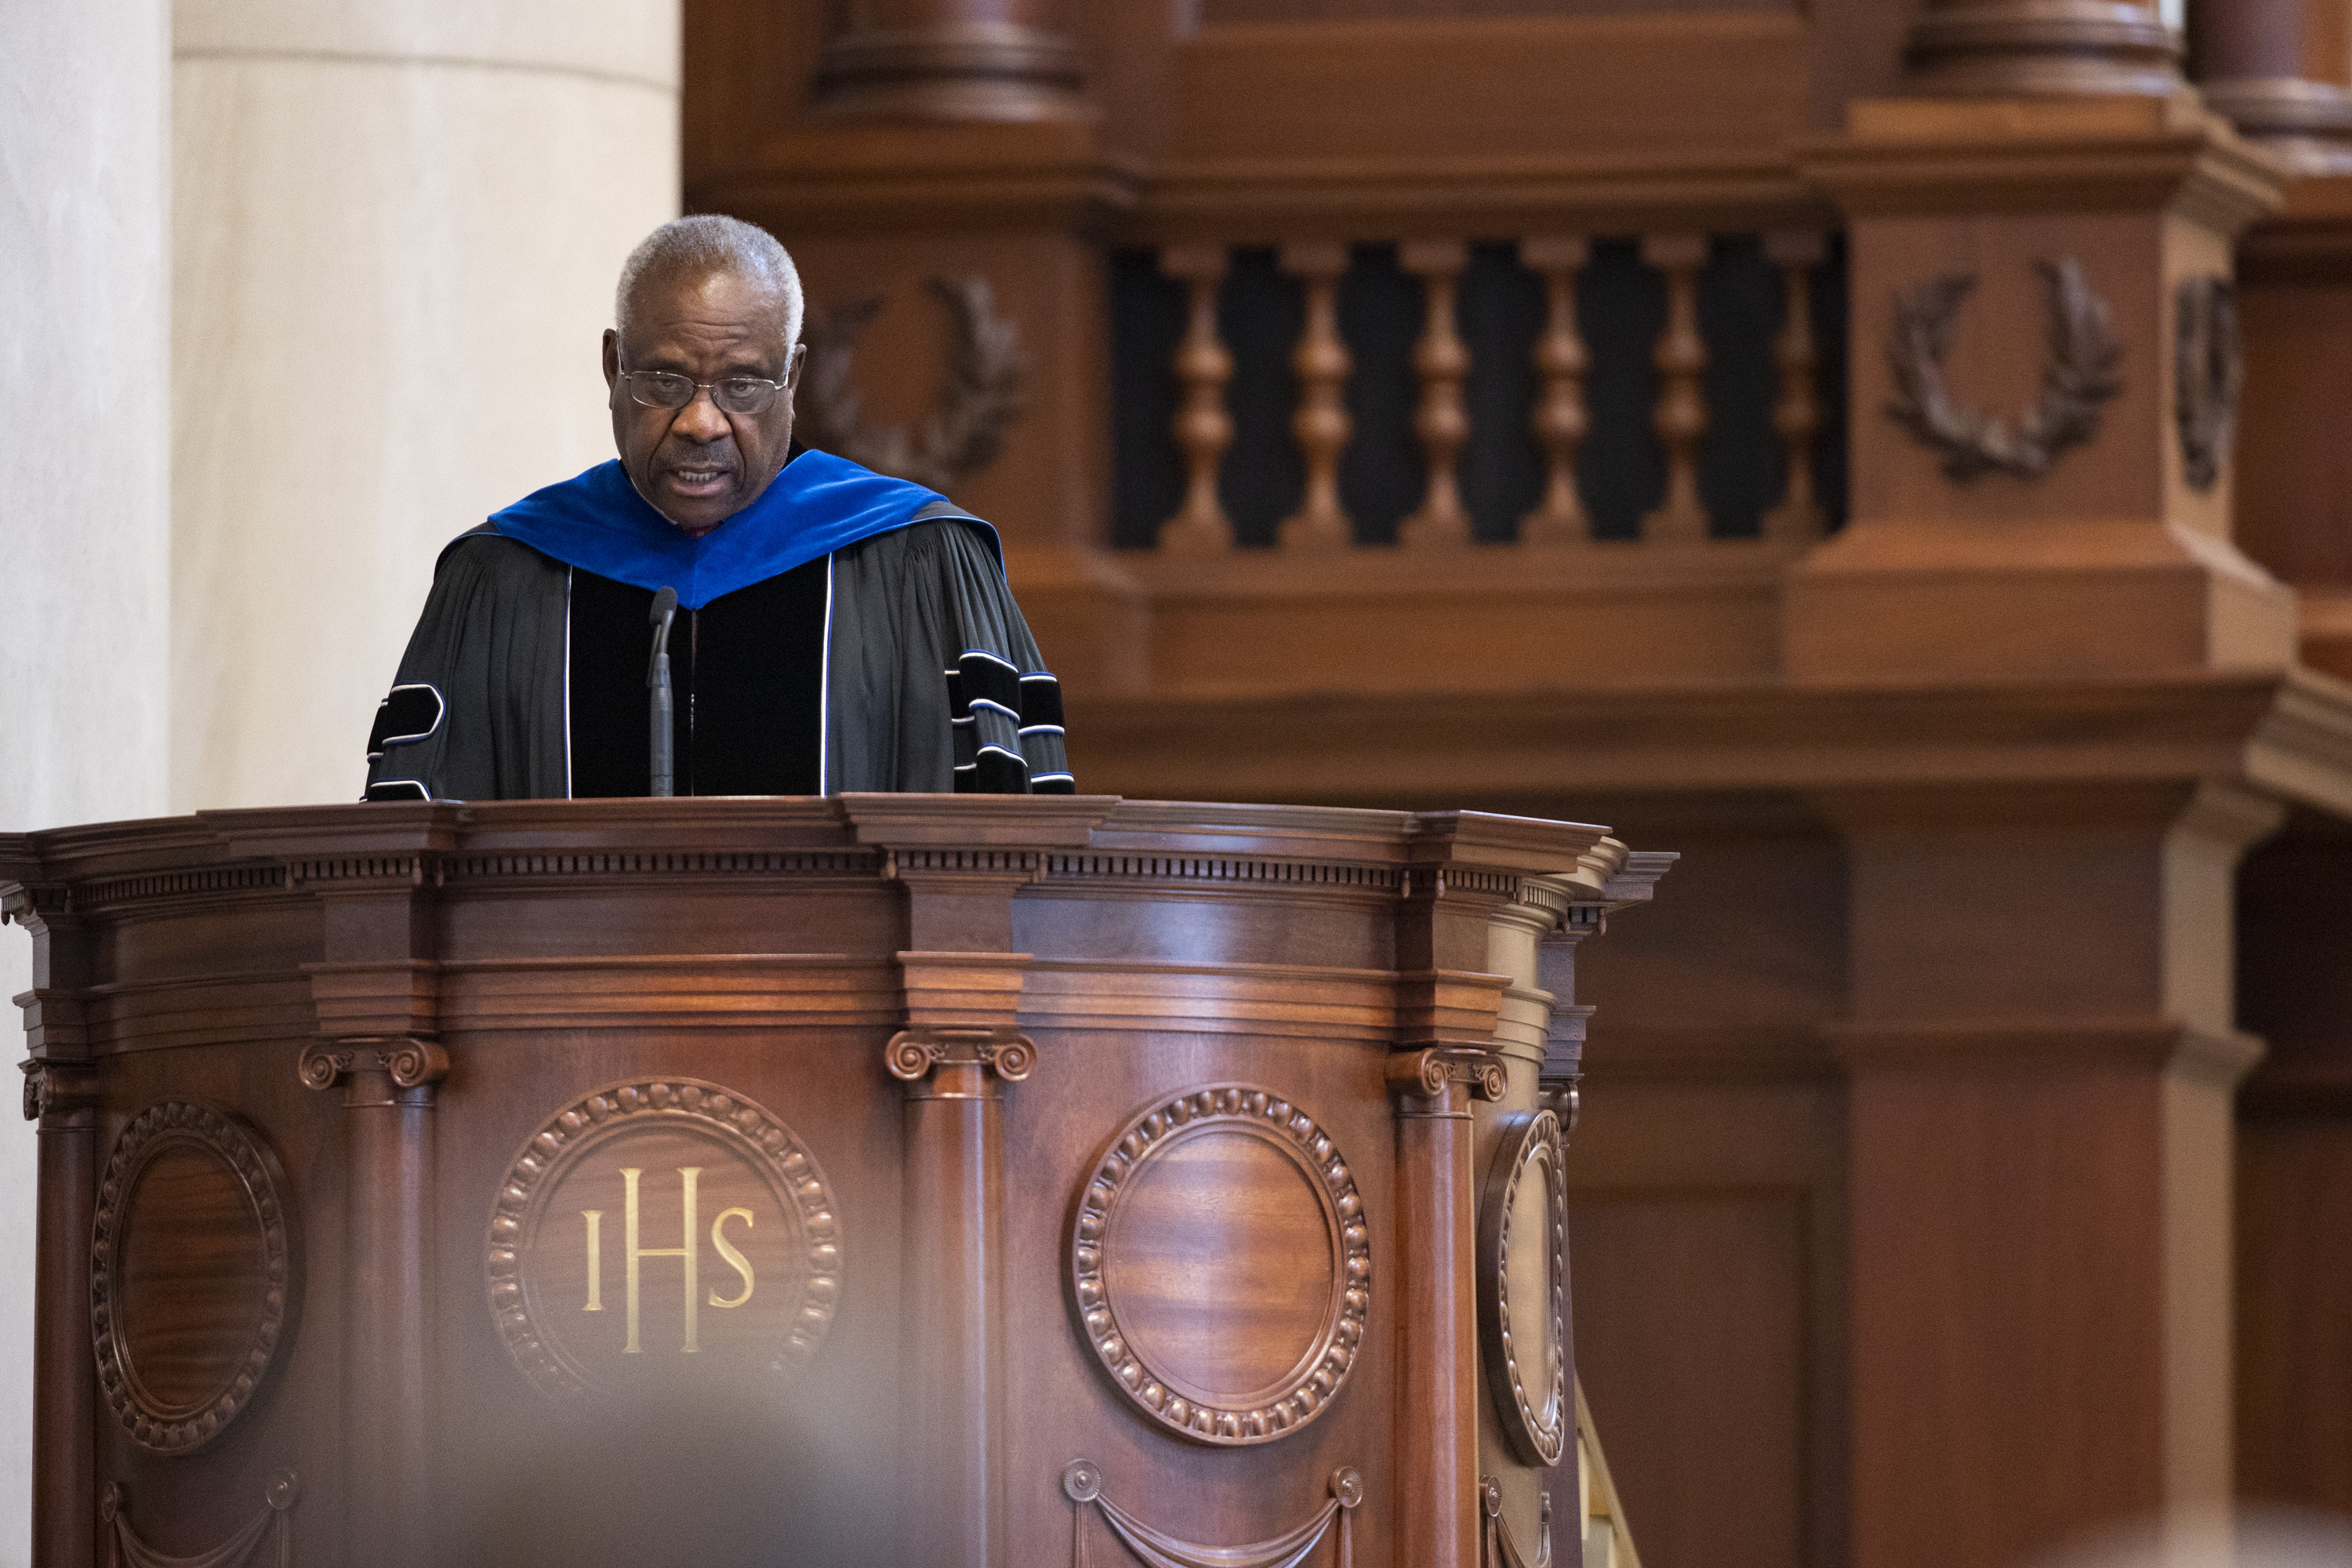 Clarence Thomas, associate justice of the Supreme Court of the United States, as the featured speaker providing the dedication of Christ Chapel. 